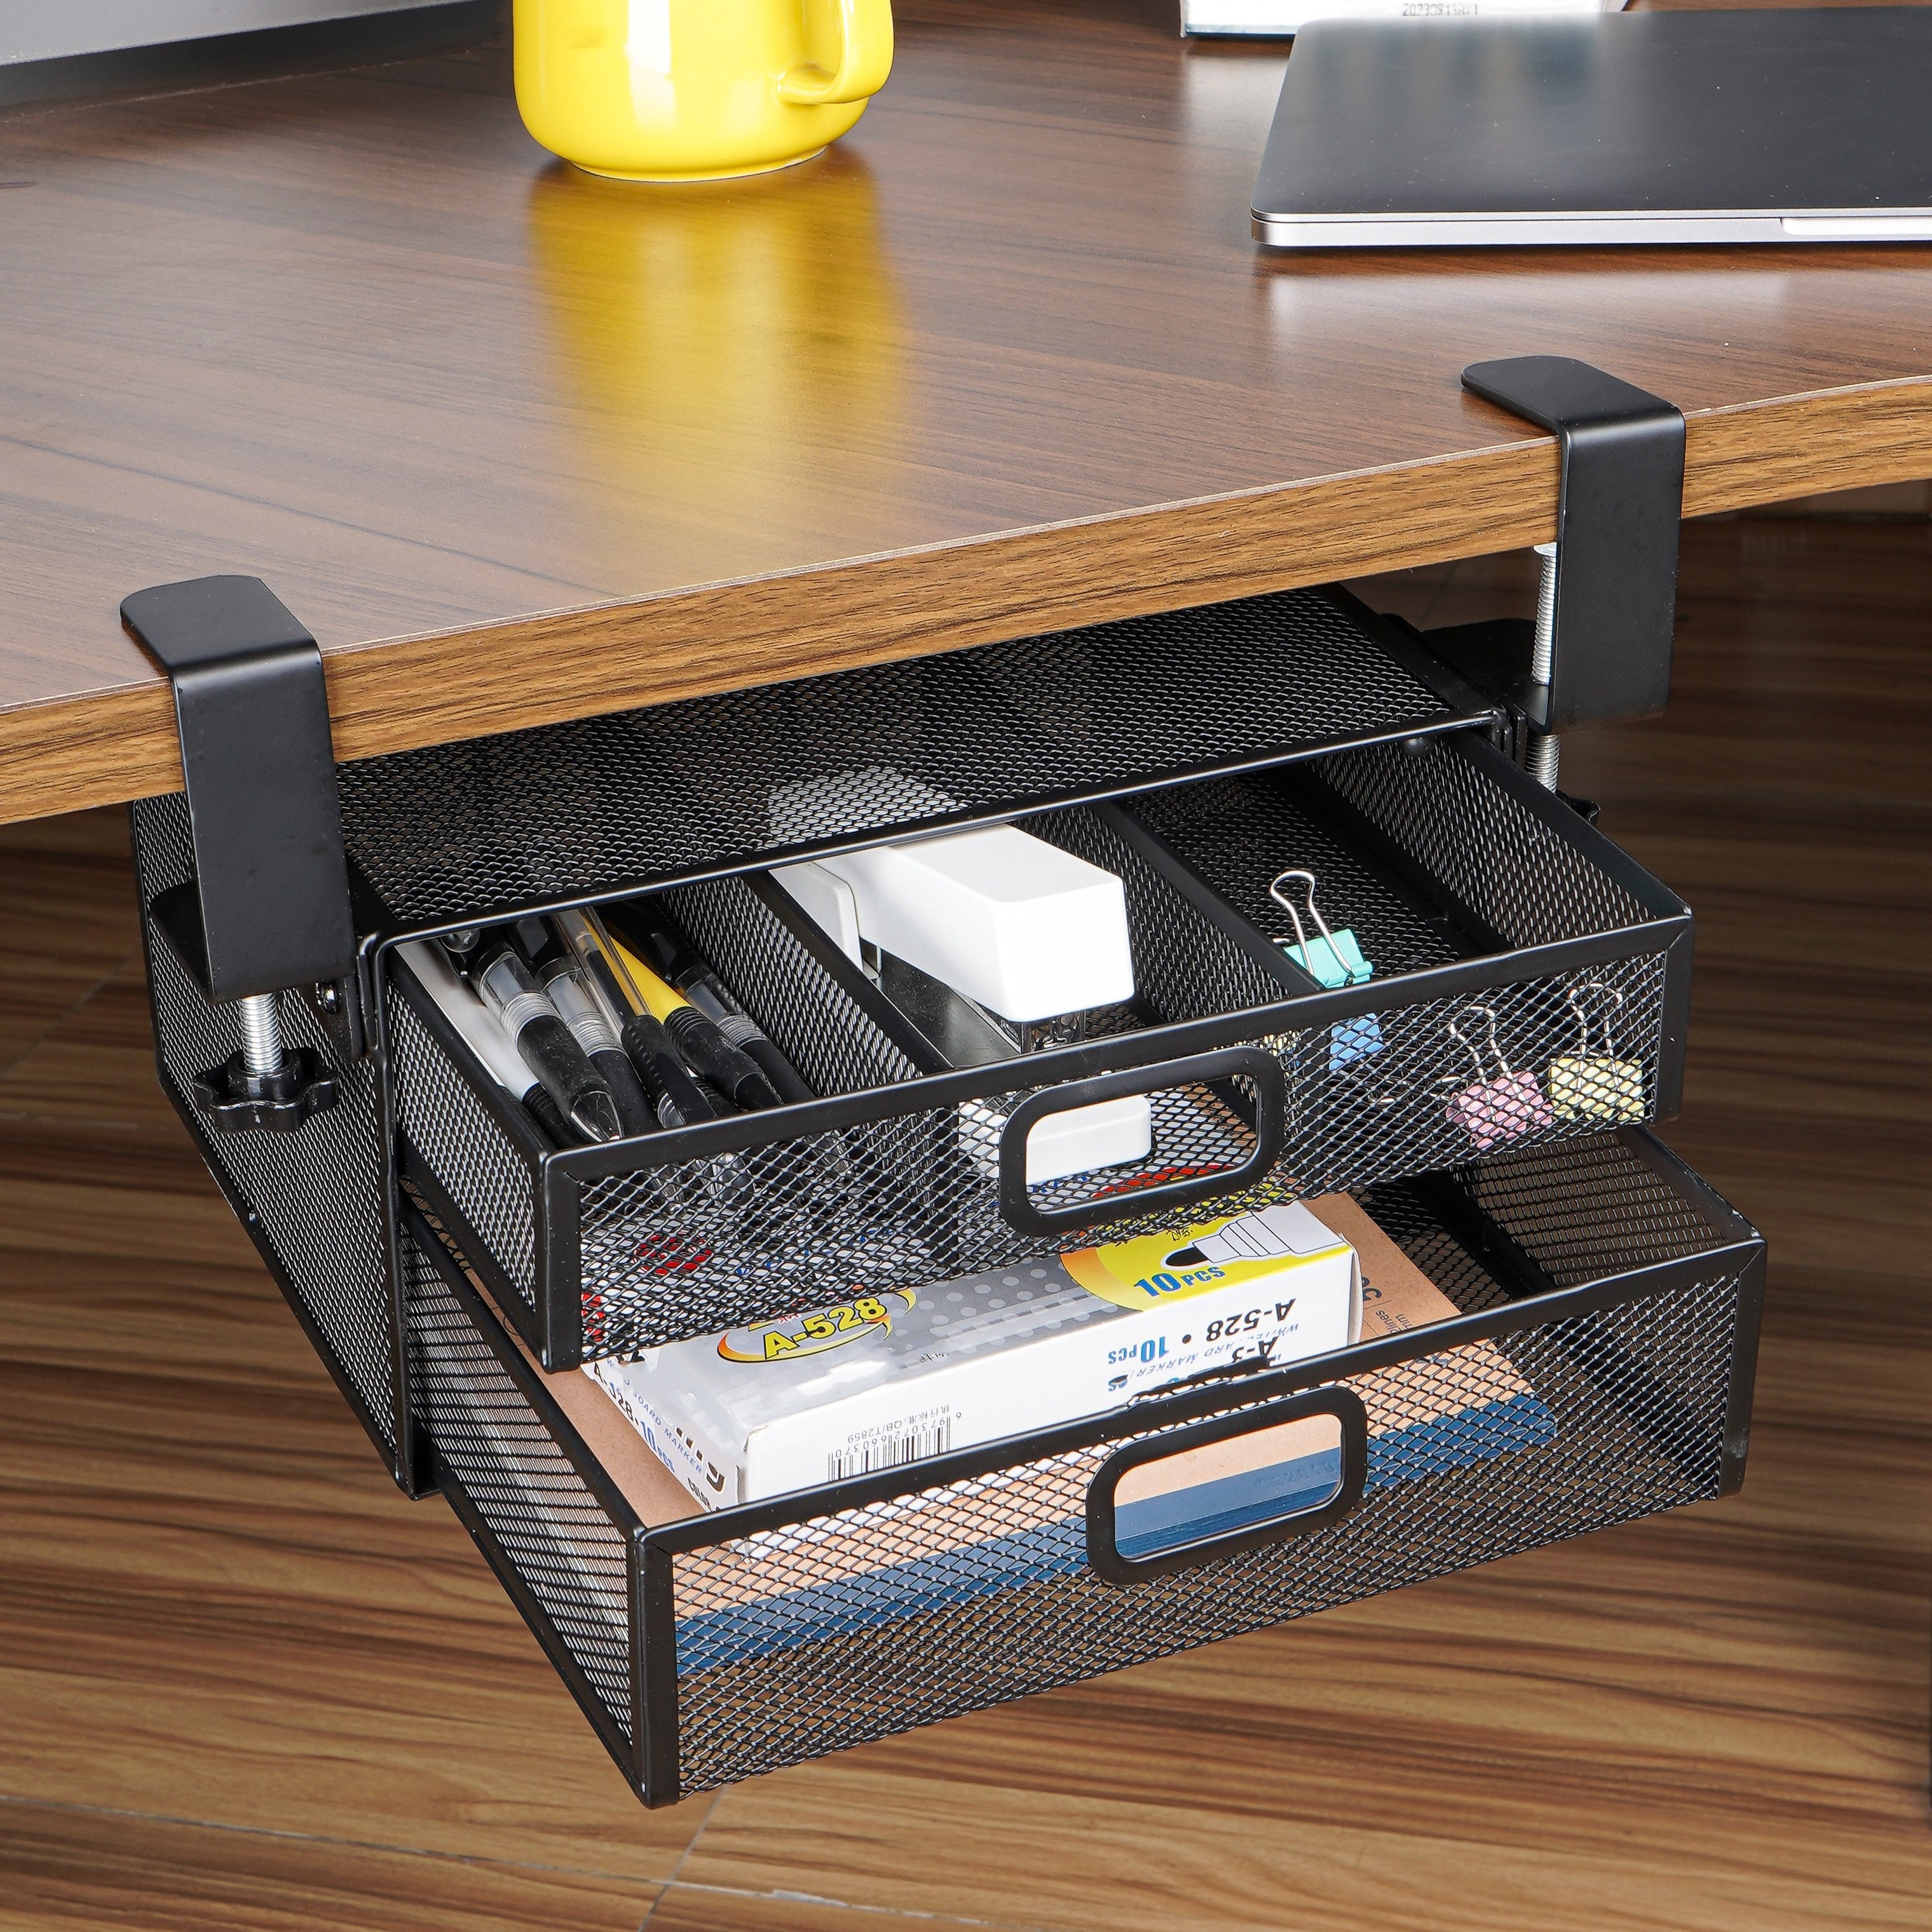 

1pc Under Desk Drawer Organizer, No-drill Pull-out Storage, Modern Metal Under Table Drawer For Home And Office, Dust-proof Mesh Desk Drawer Basket, Black